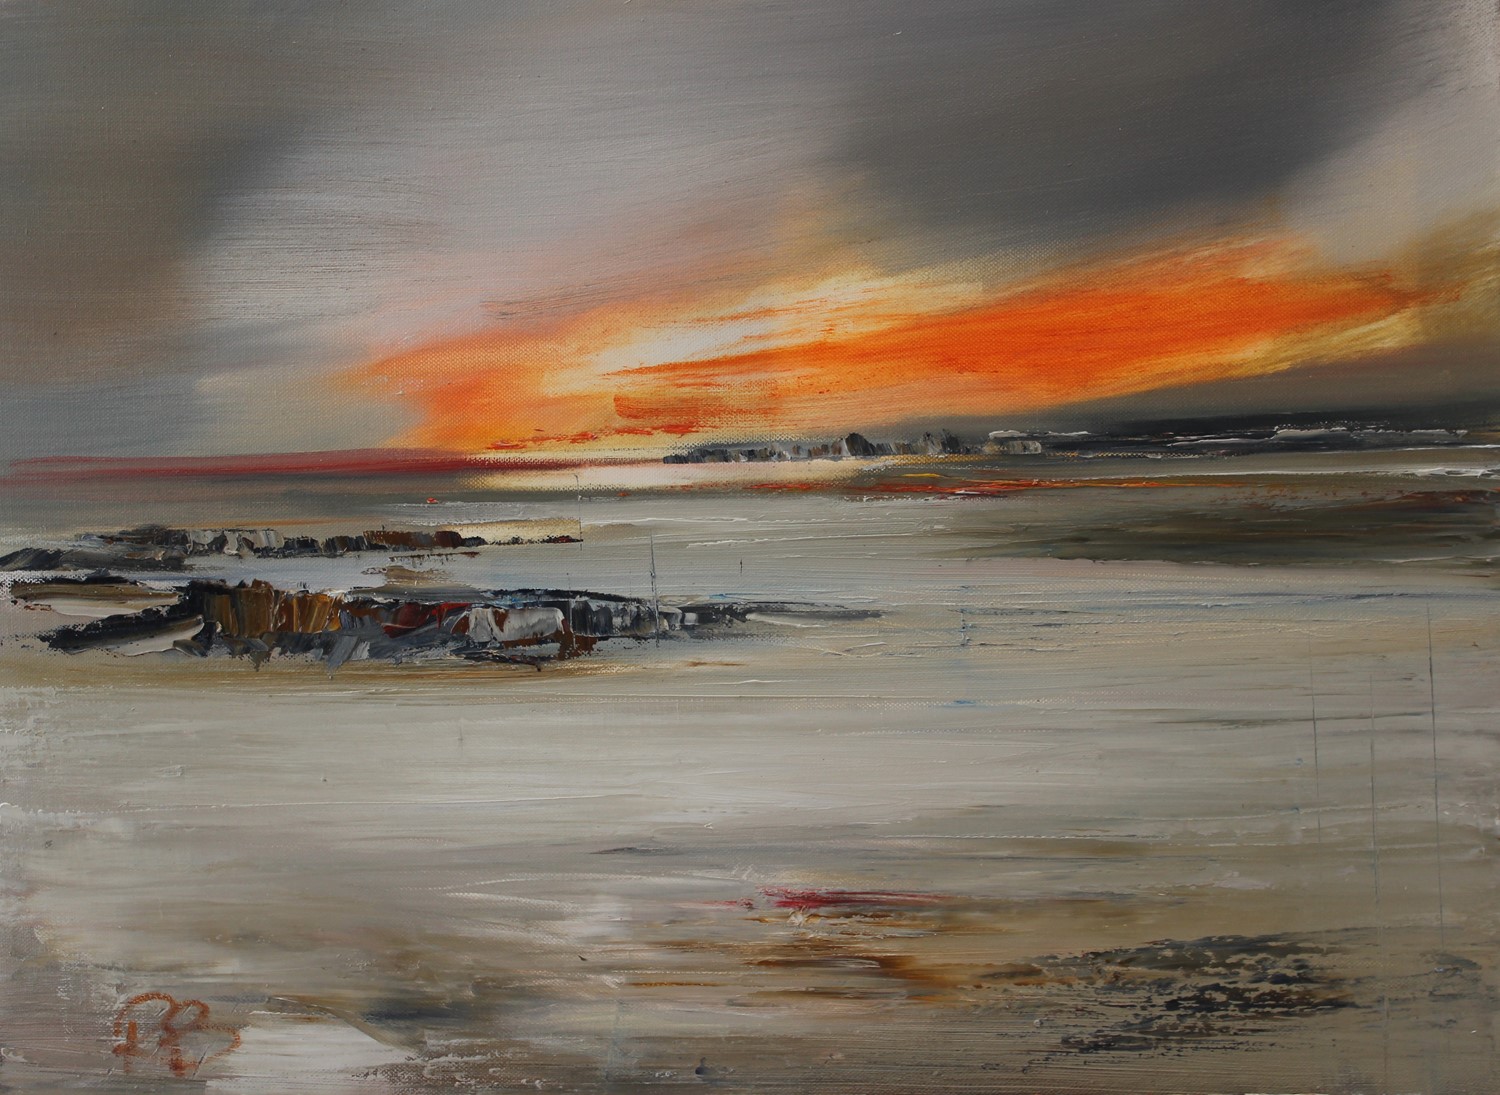 'Time and Tide' by artist Rosanne Barr